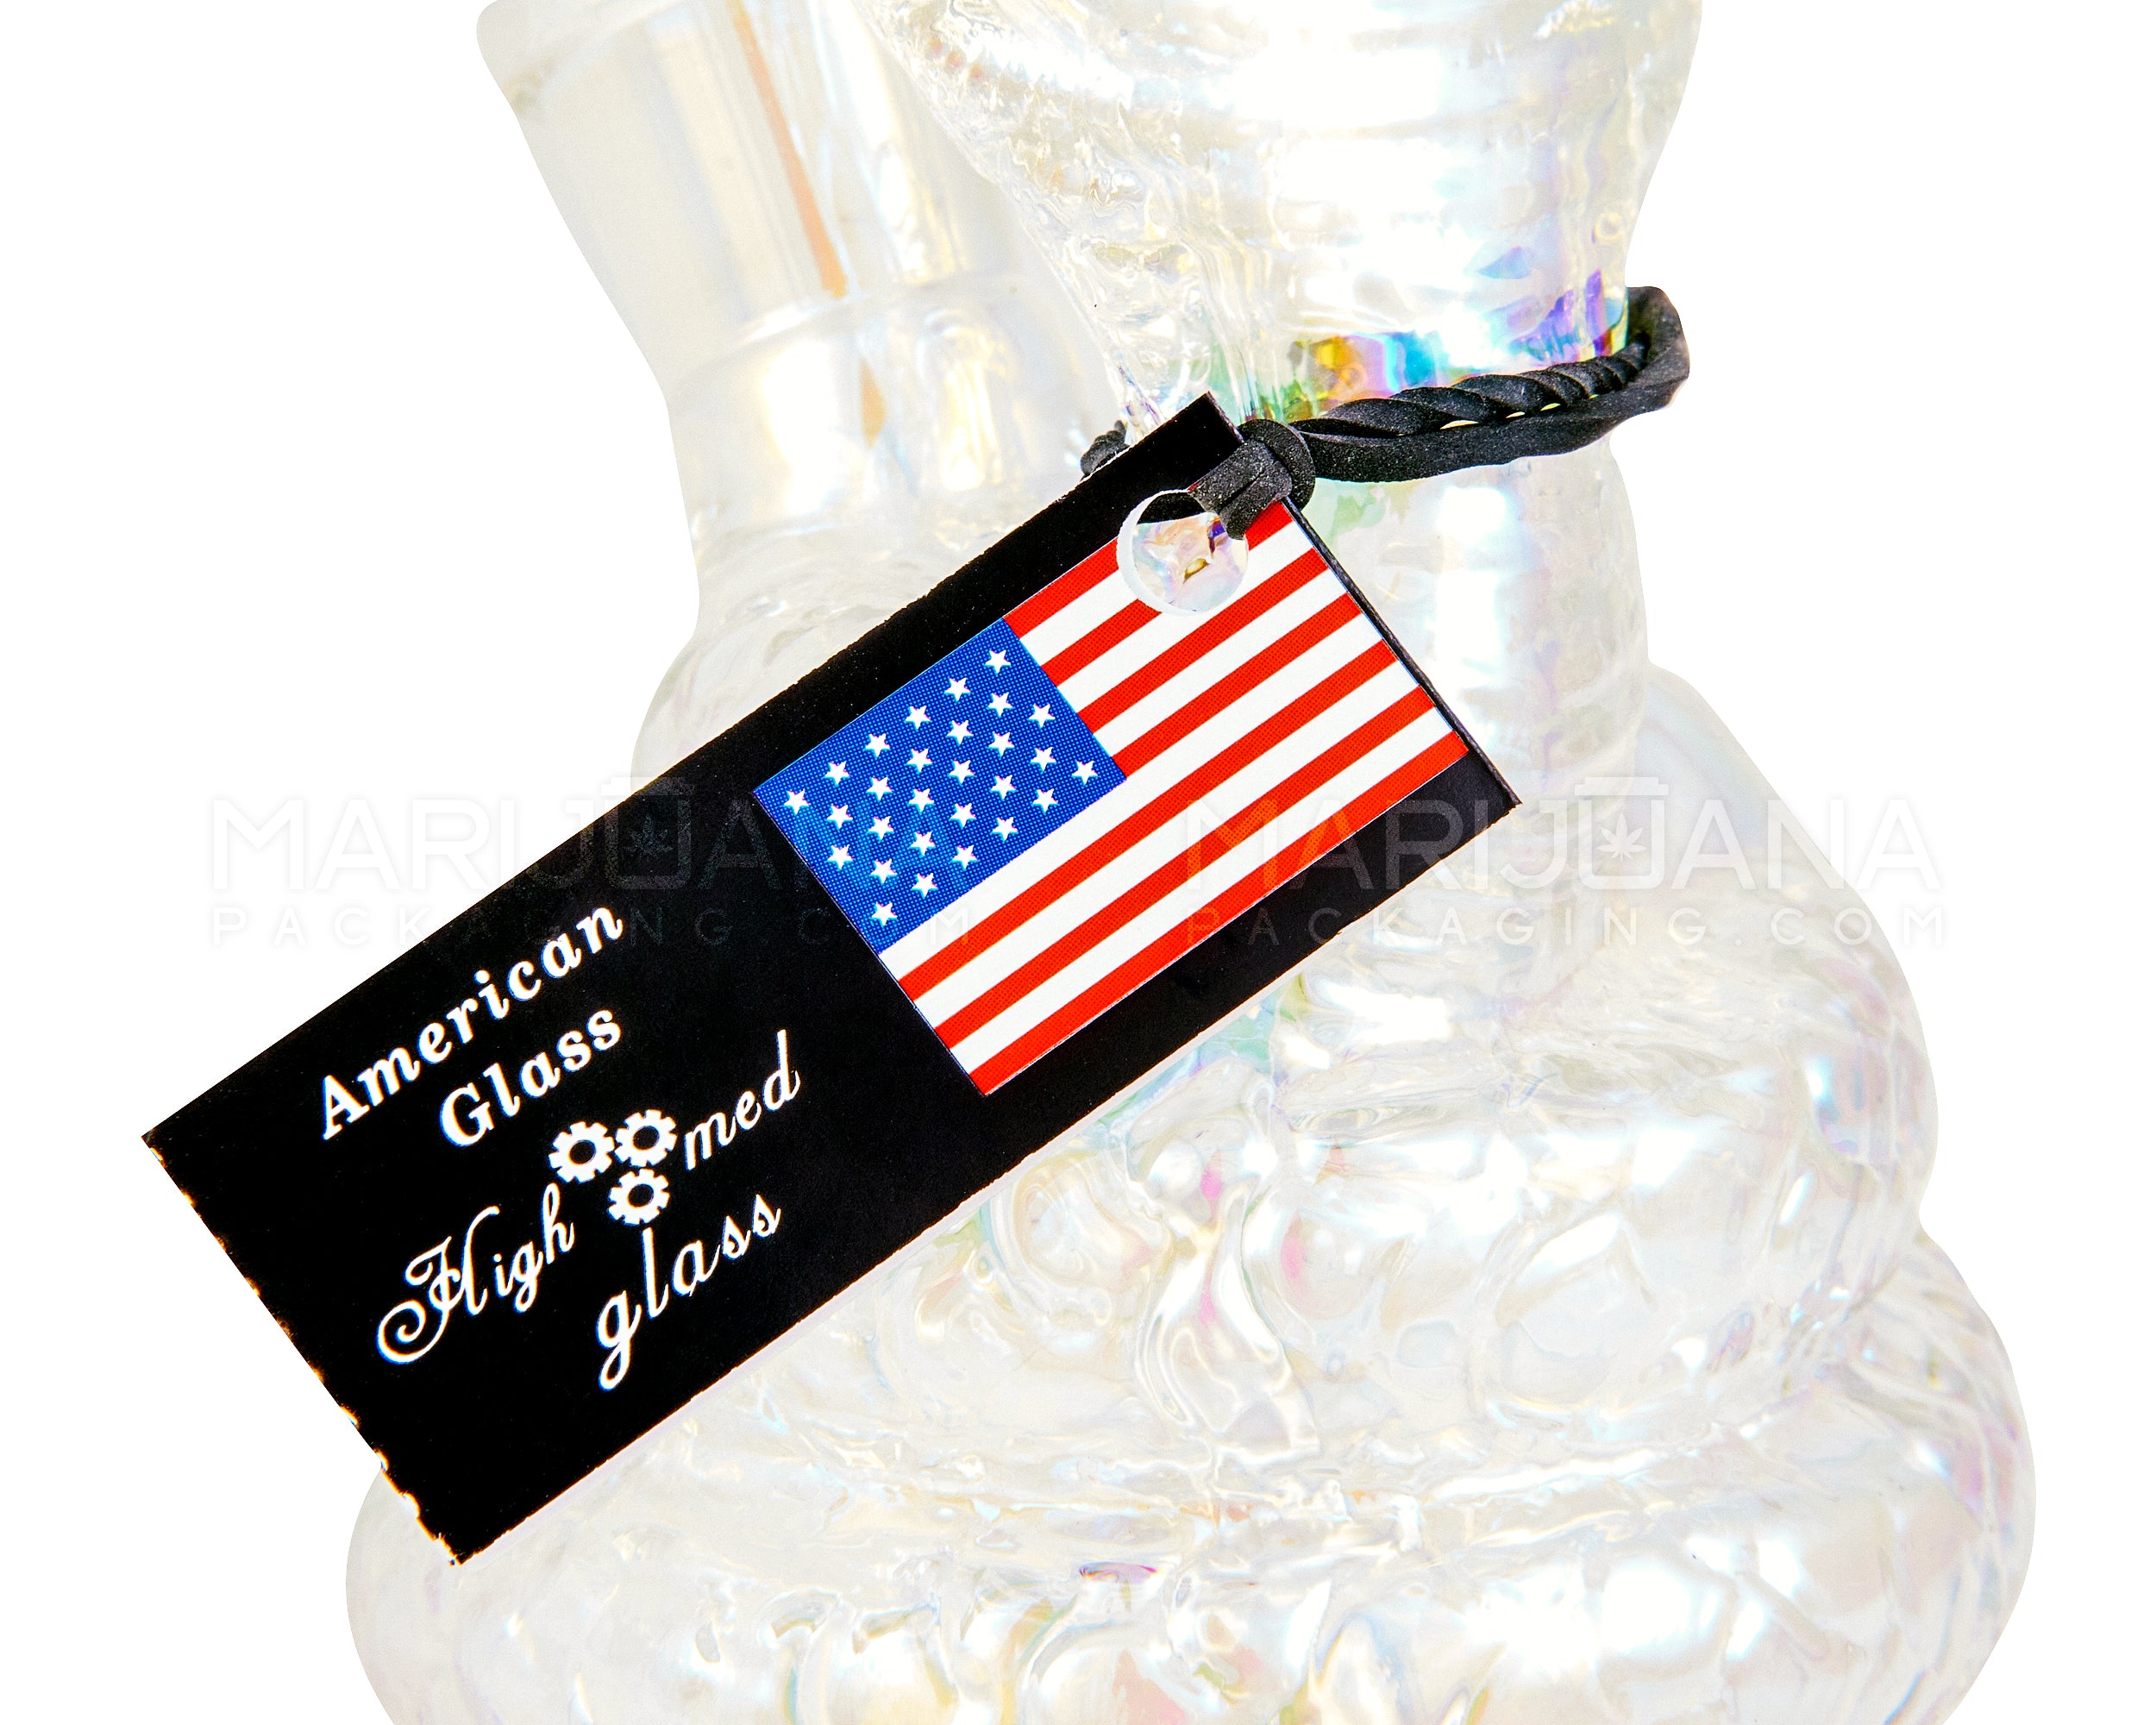 USA Glass | Iridescent Coiled Cobra Glass Water Pipe | 6.5in Tall - 14mm Bowl - Rainbow - 5